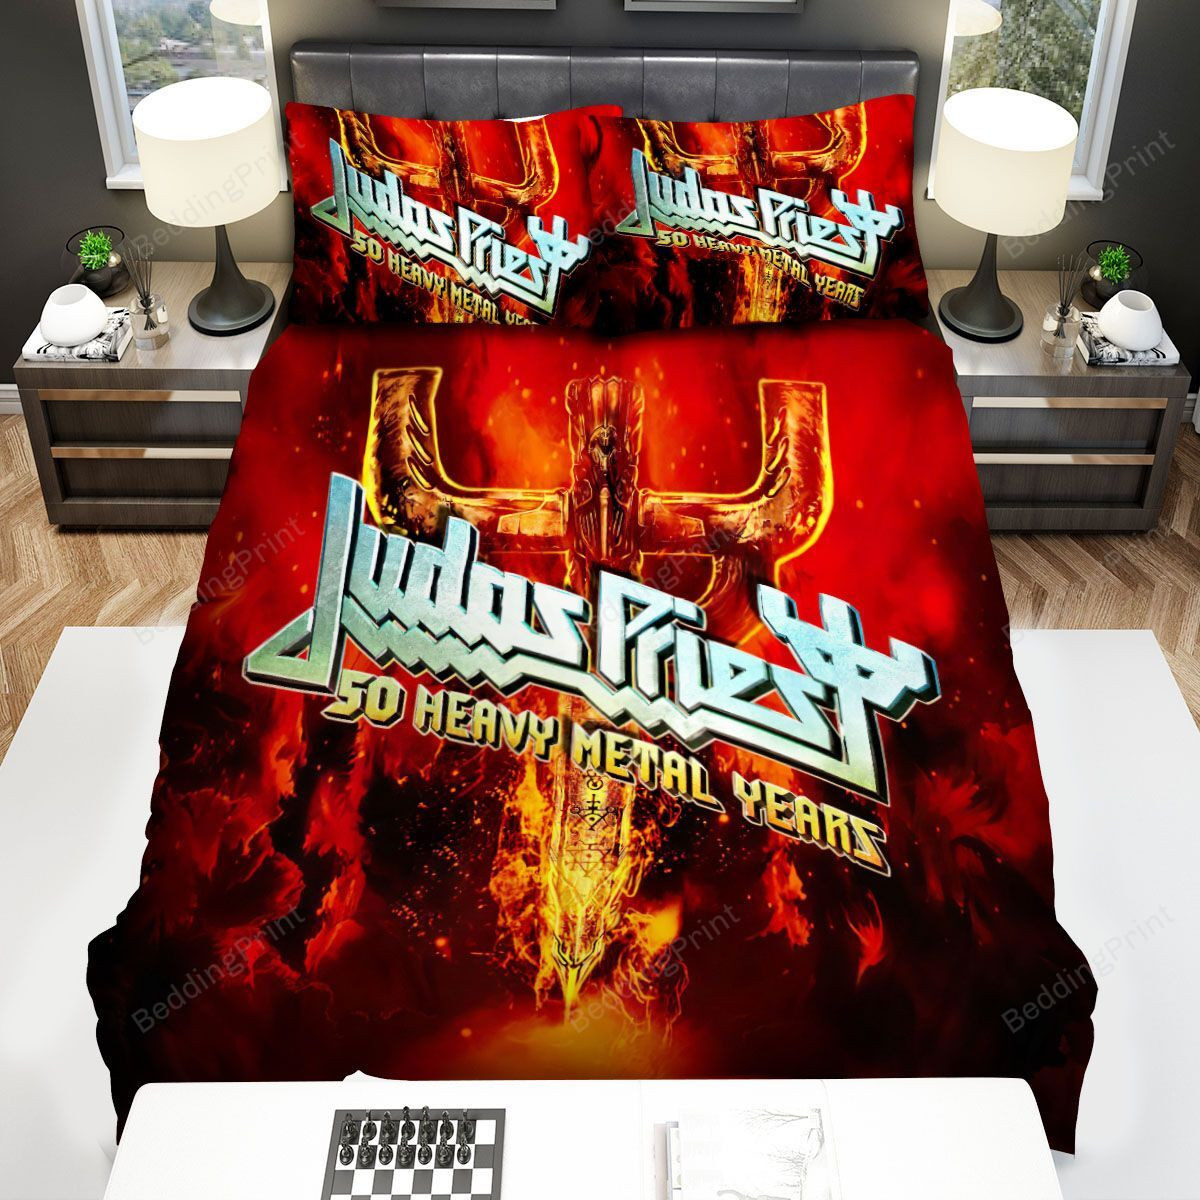 Judas Priest 50 Heavy Metal Years Bed Sheets Duvet Cover Bedding Sets ...